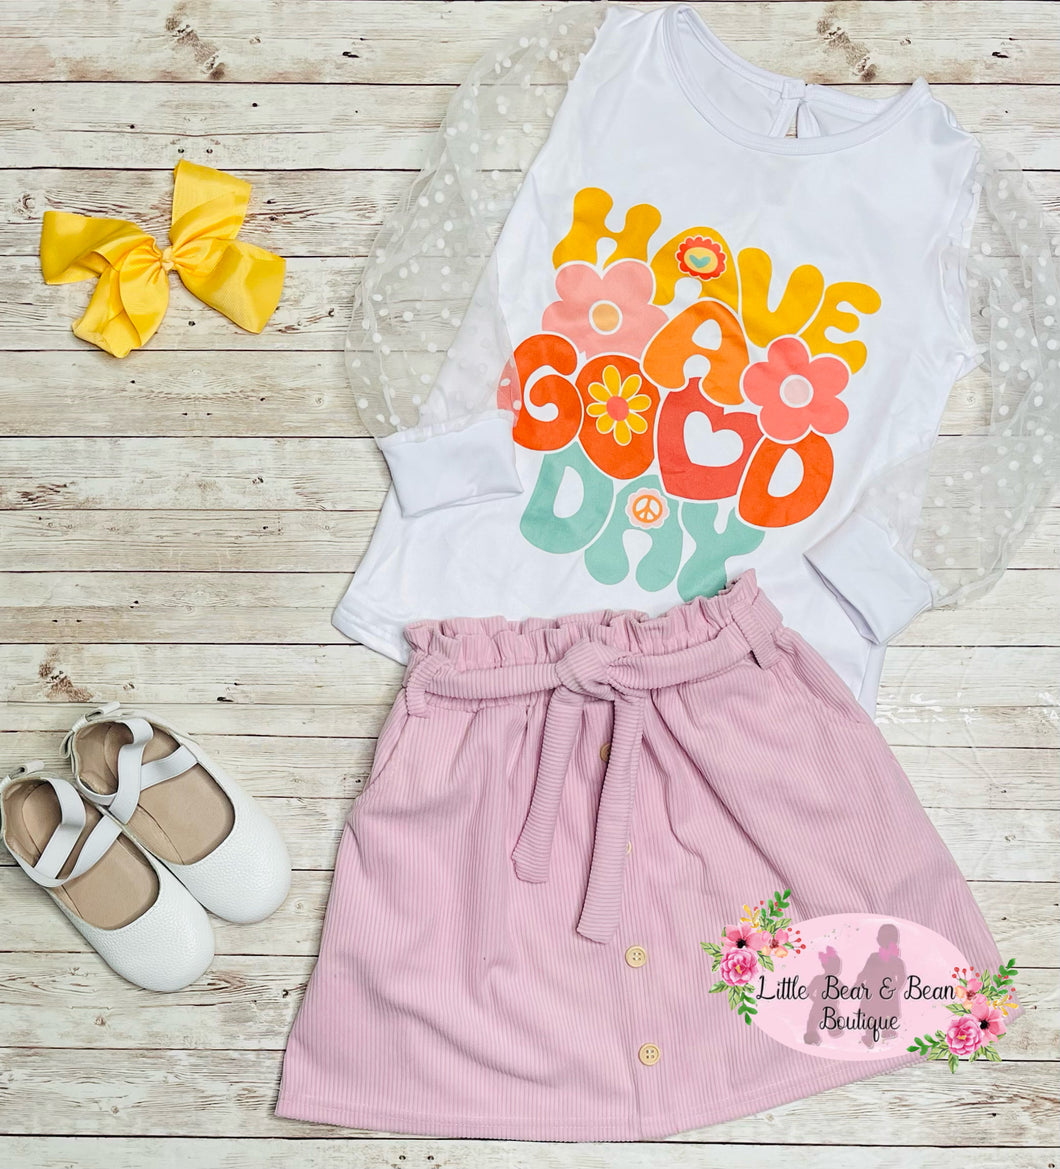 Have A Good Day Skirt Set